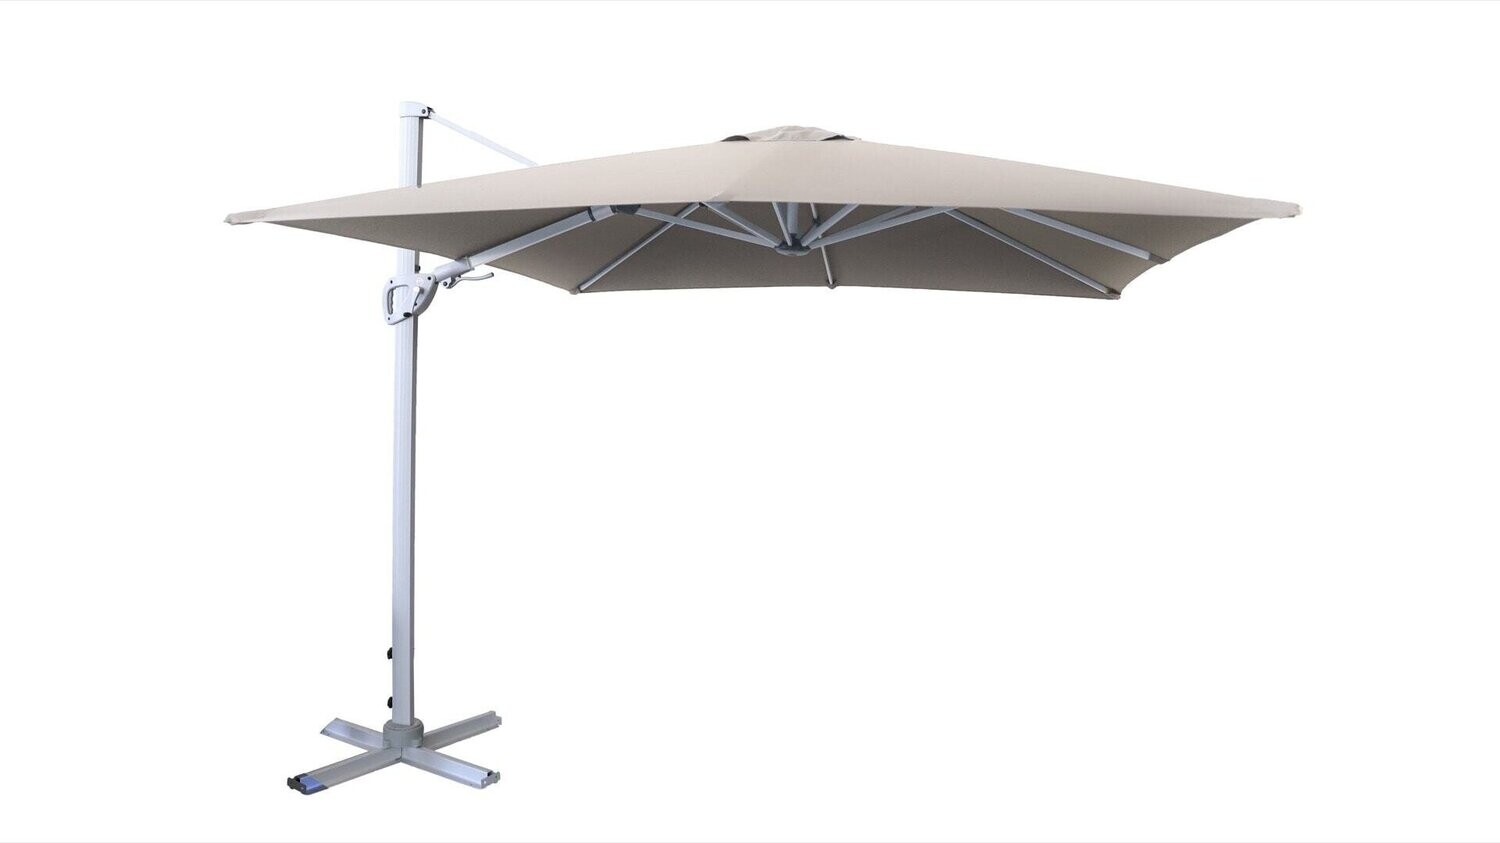 Pacific 2.7m Cantilever Parasol - SQUARE DOVE with 360 rotation & tilt function and free cover